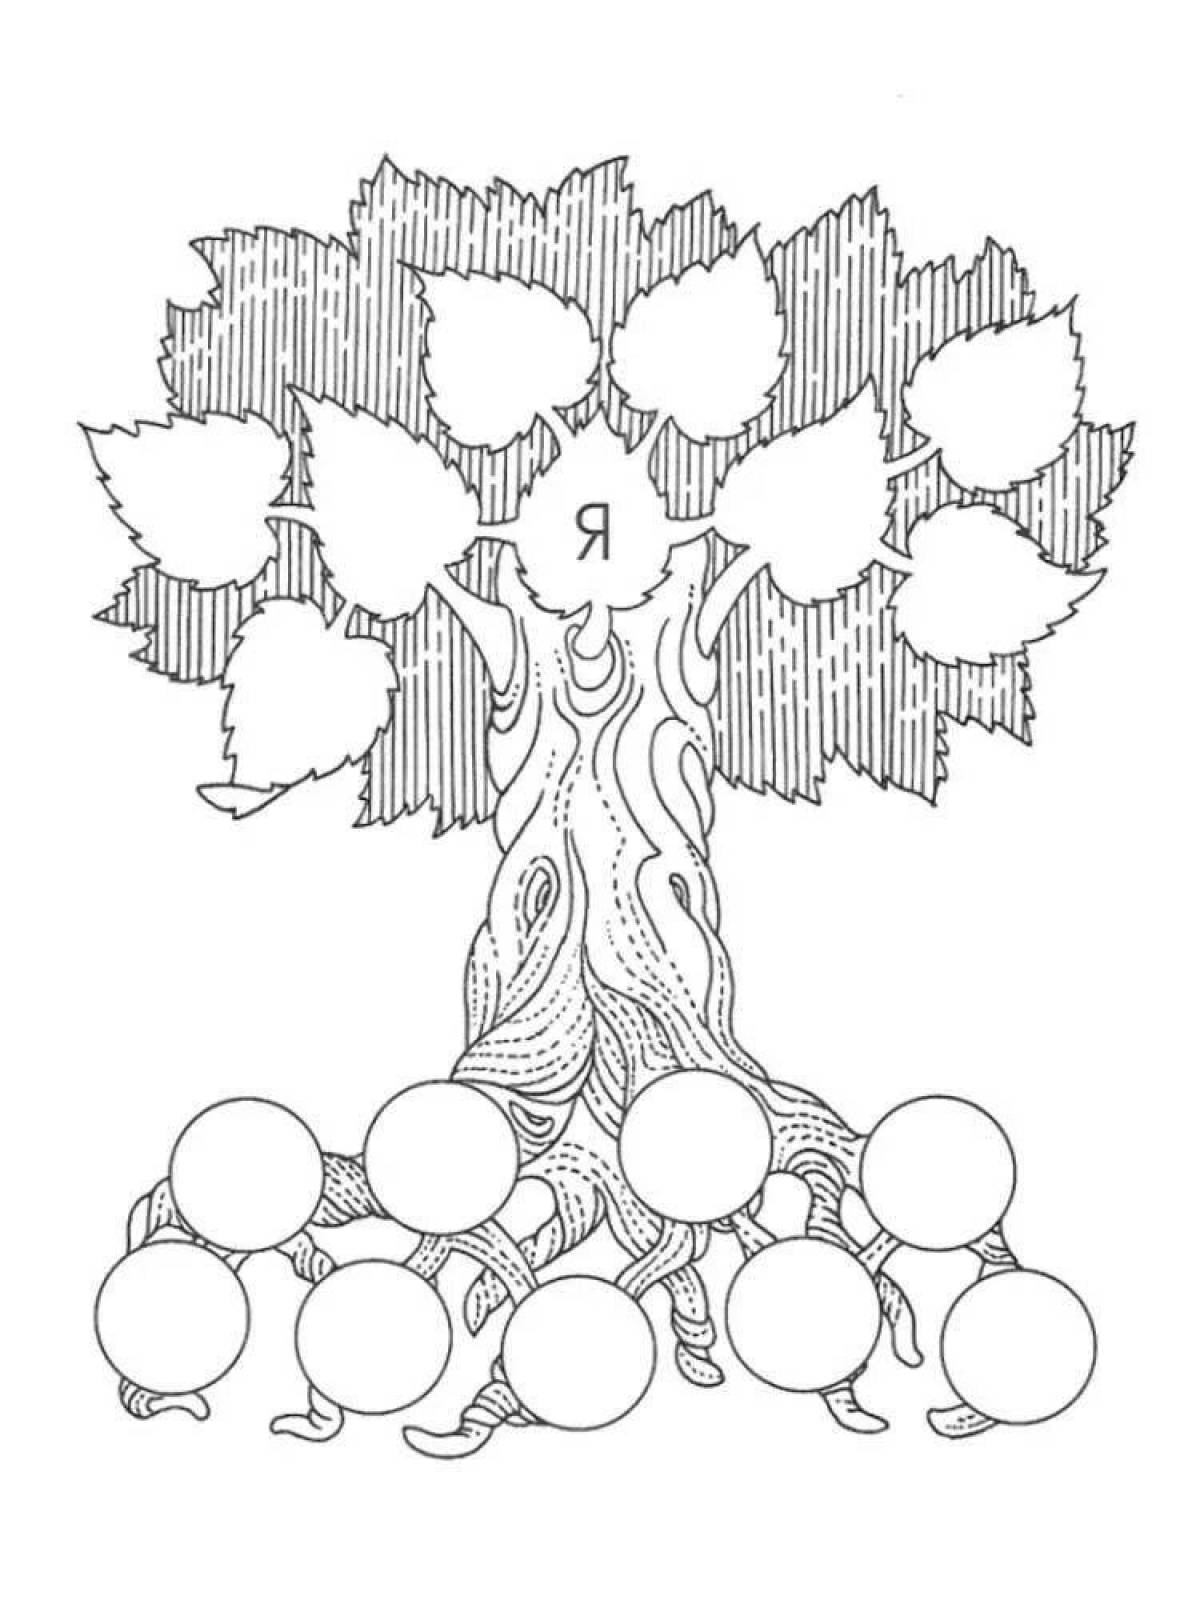 Exquisite family tree coloring book